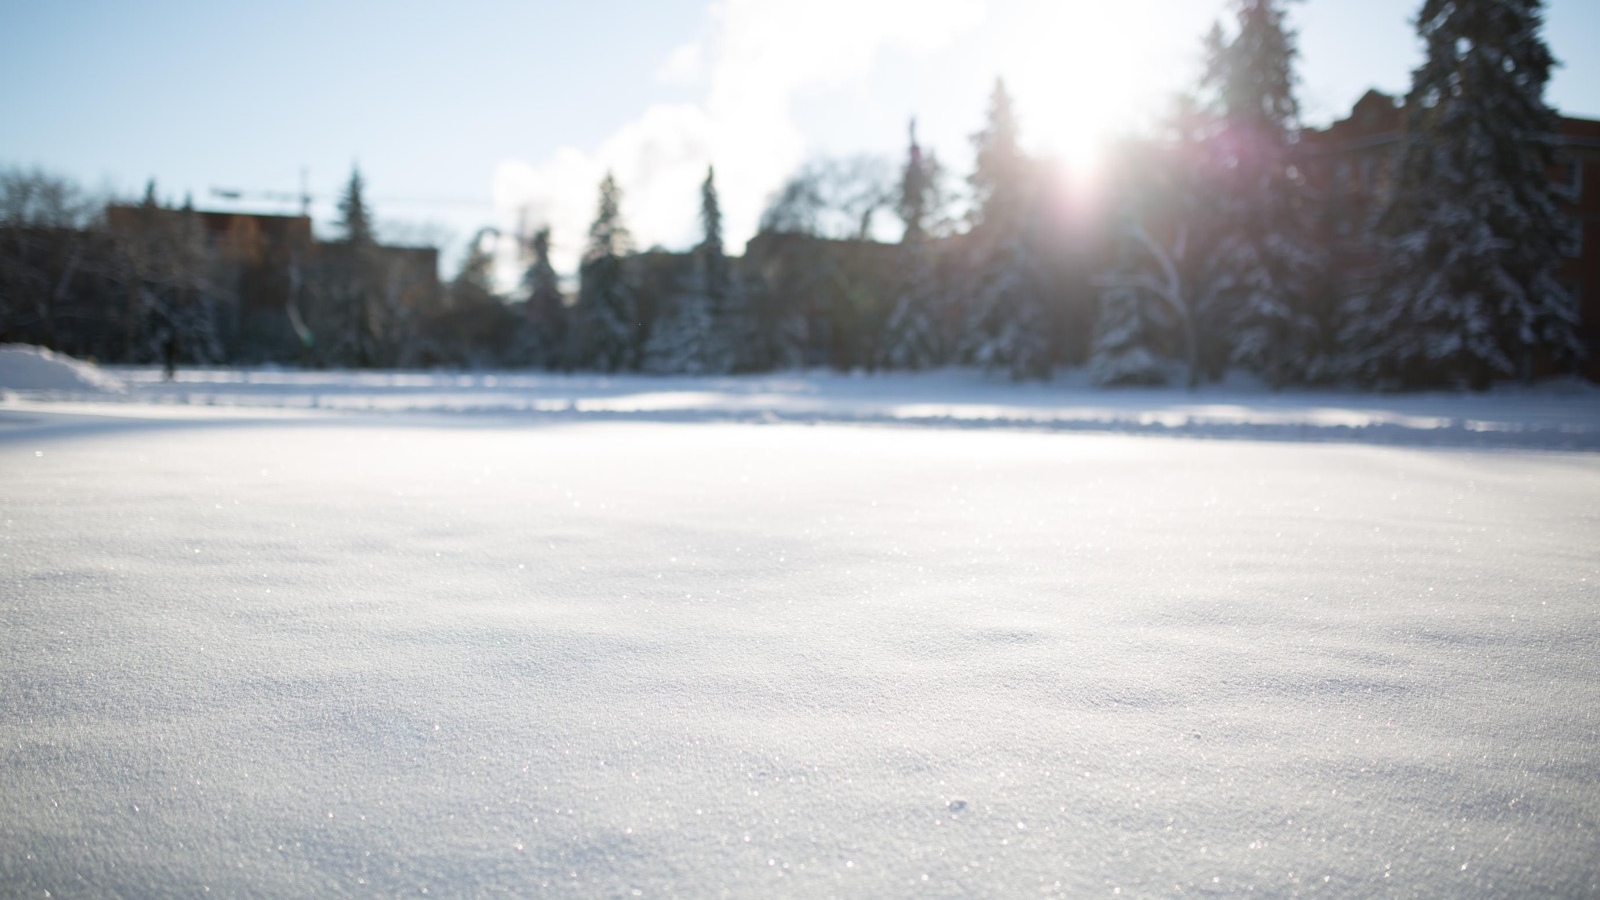 An artistic image of a field of snow. The image is crisply focused at the bottom and the trees and builidings in the distance are intentionally out of focus.